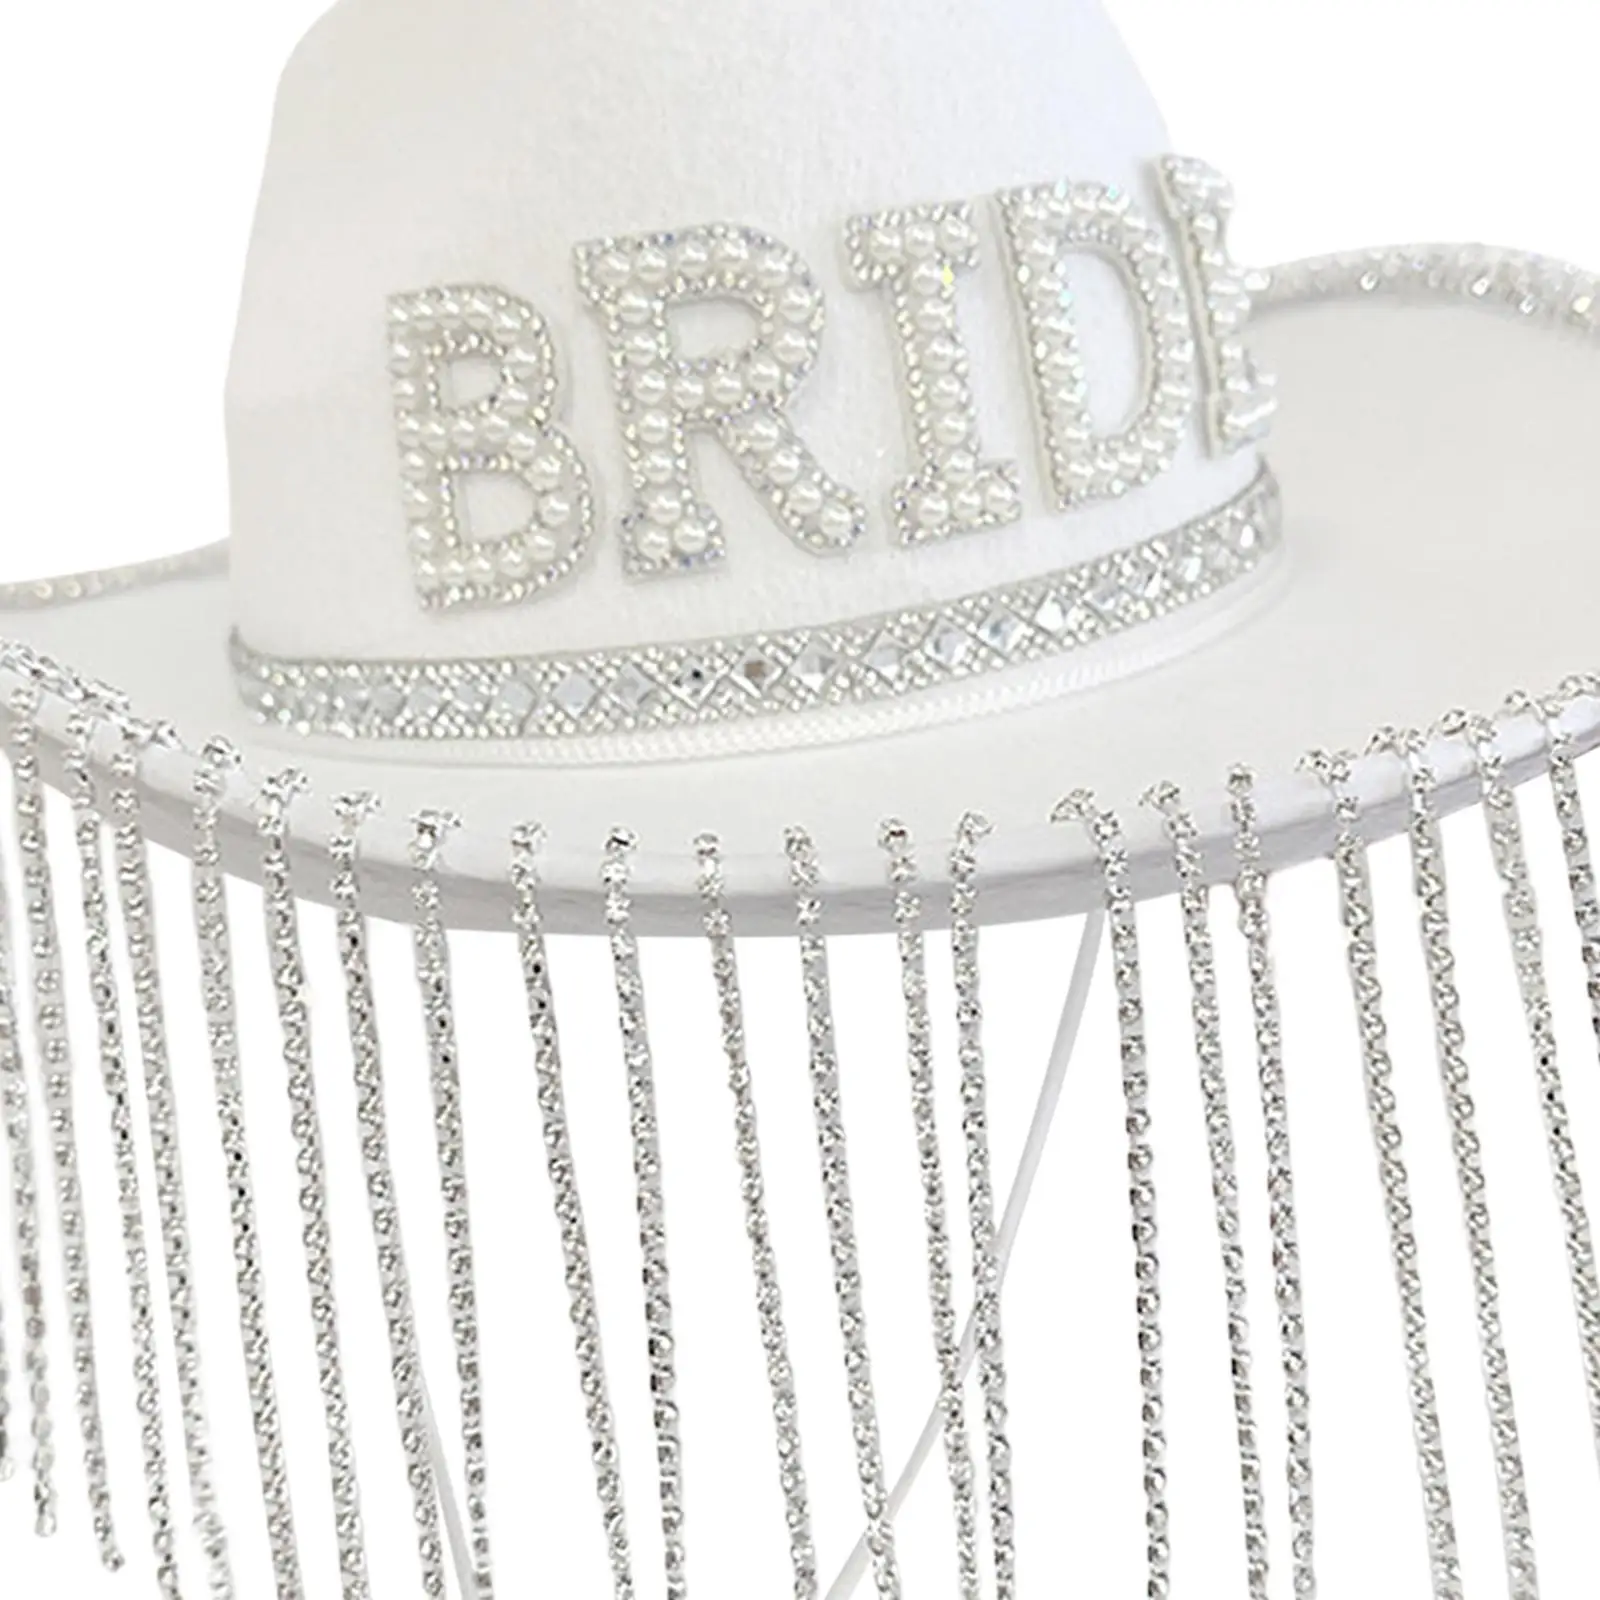 Cowgirl Hat Women Novelty White Bride Hat for Beach Engagement Party Bridal